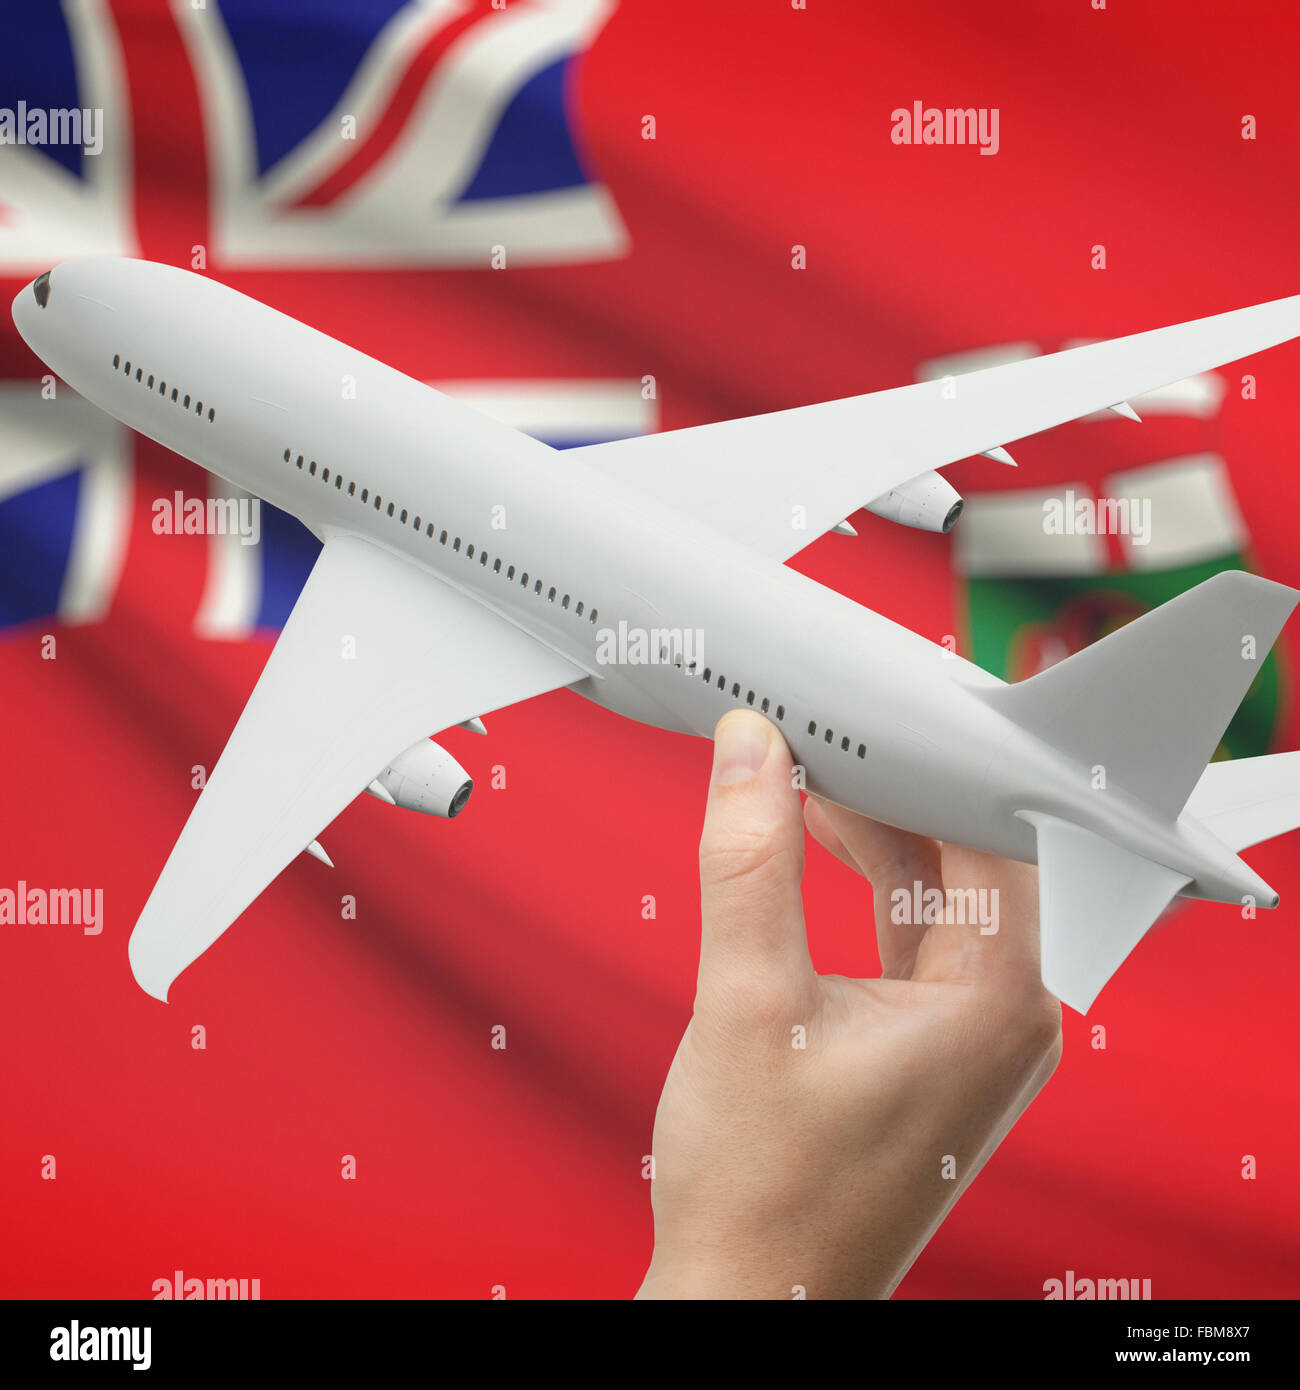 Airplane in hand with Canadian province or territory flag on background series - Manitoba Stock Photo